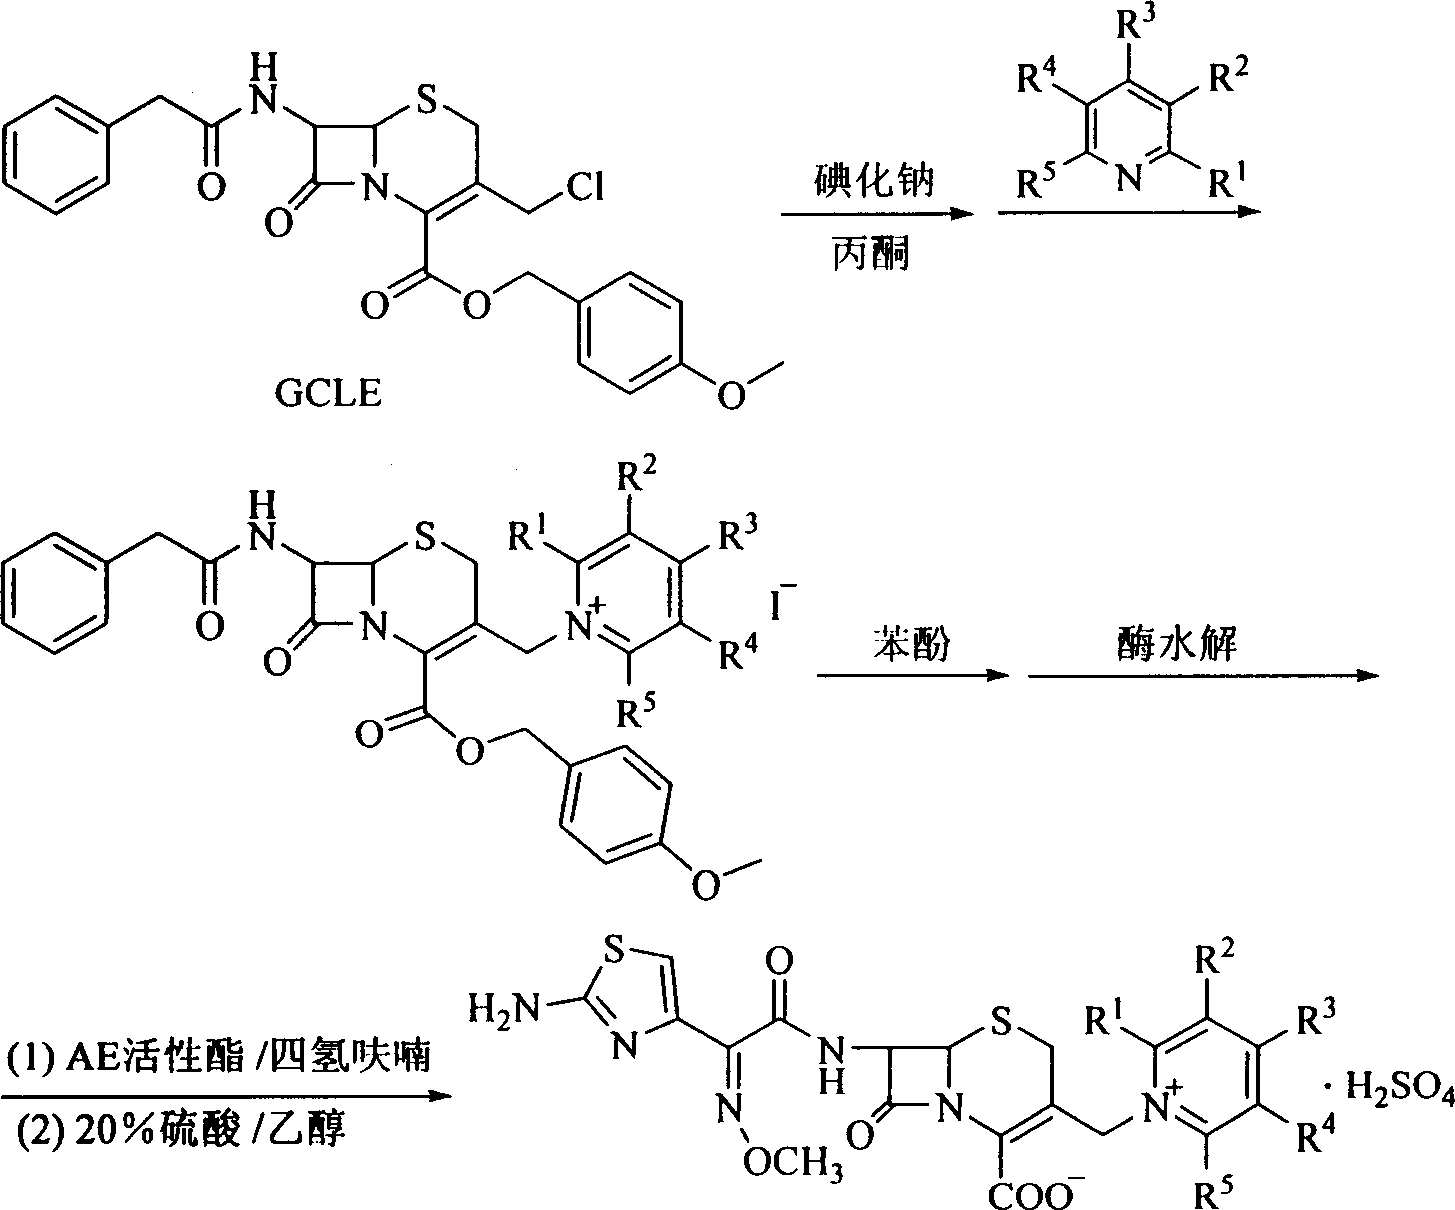 Synthesis process of cefpirome and its analog